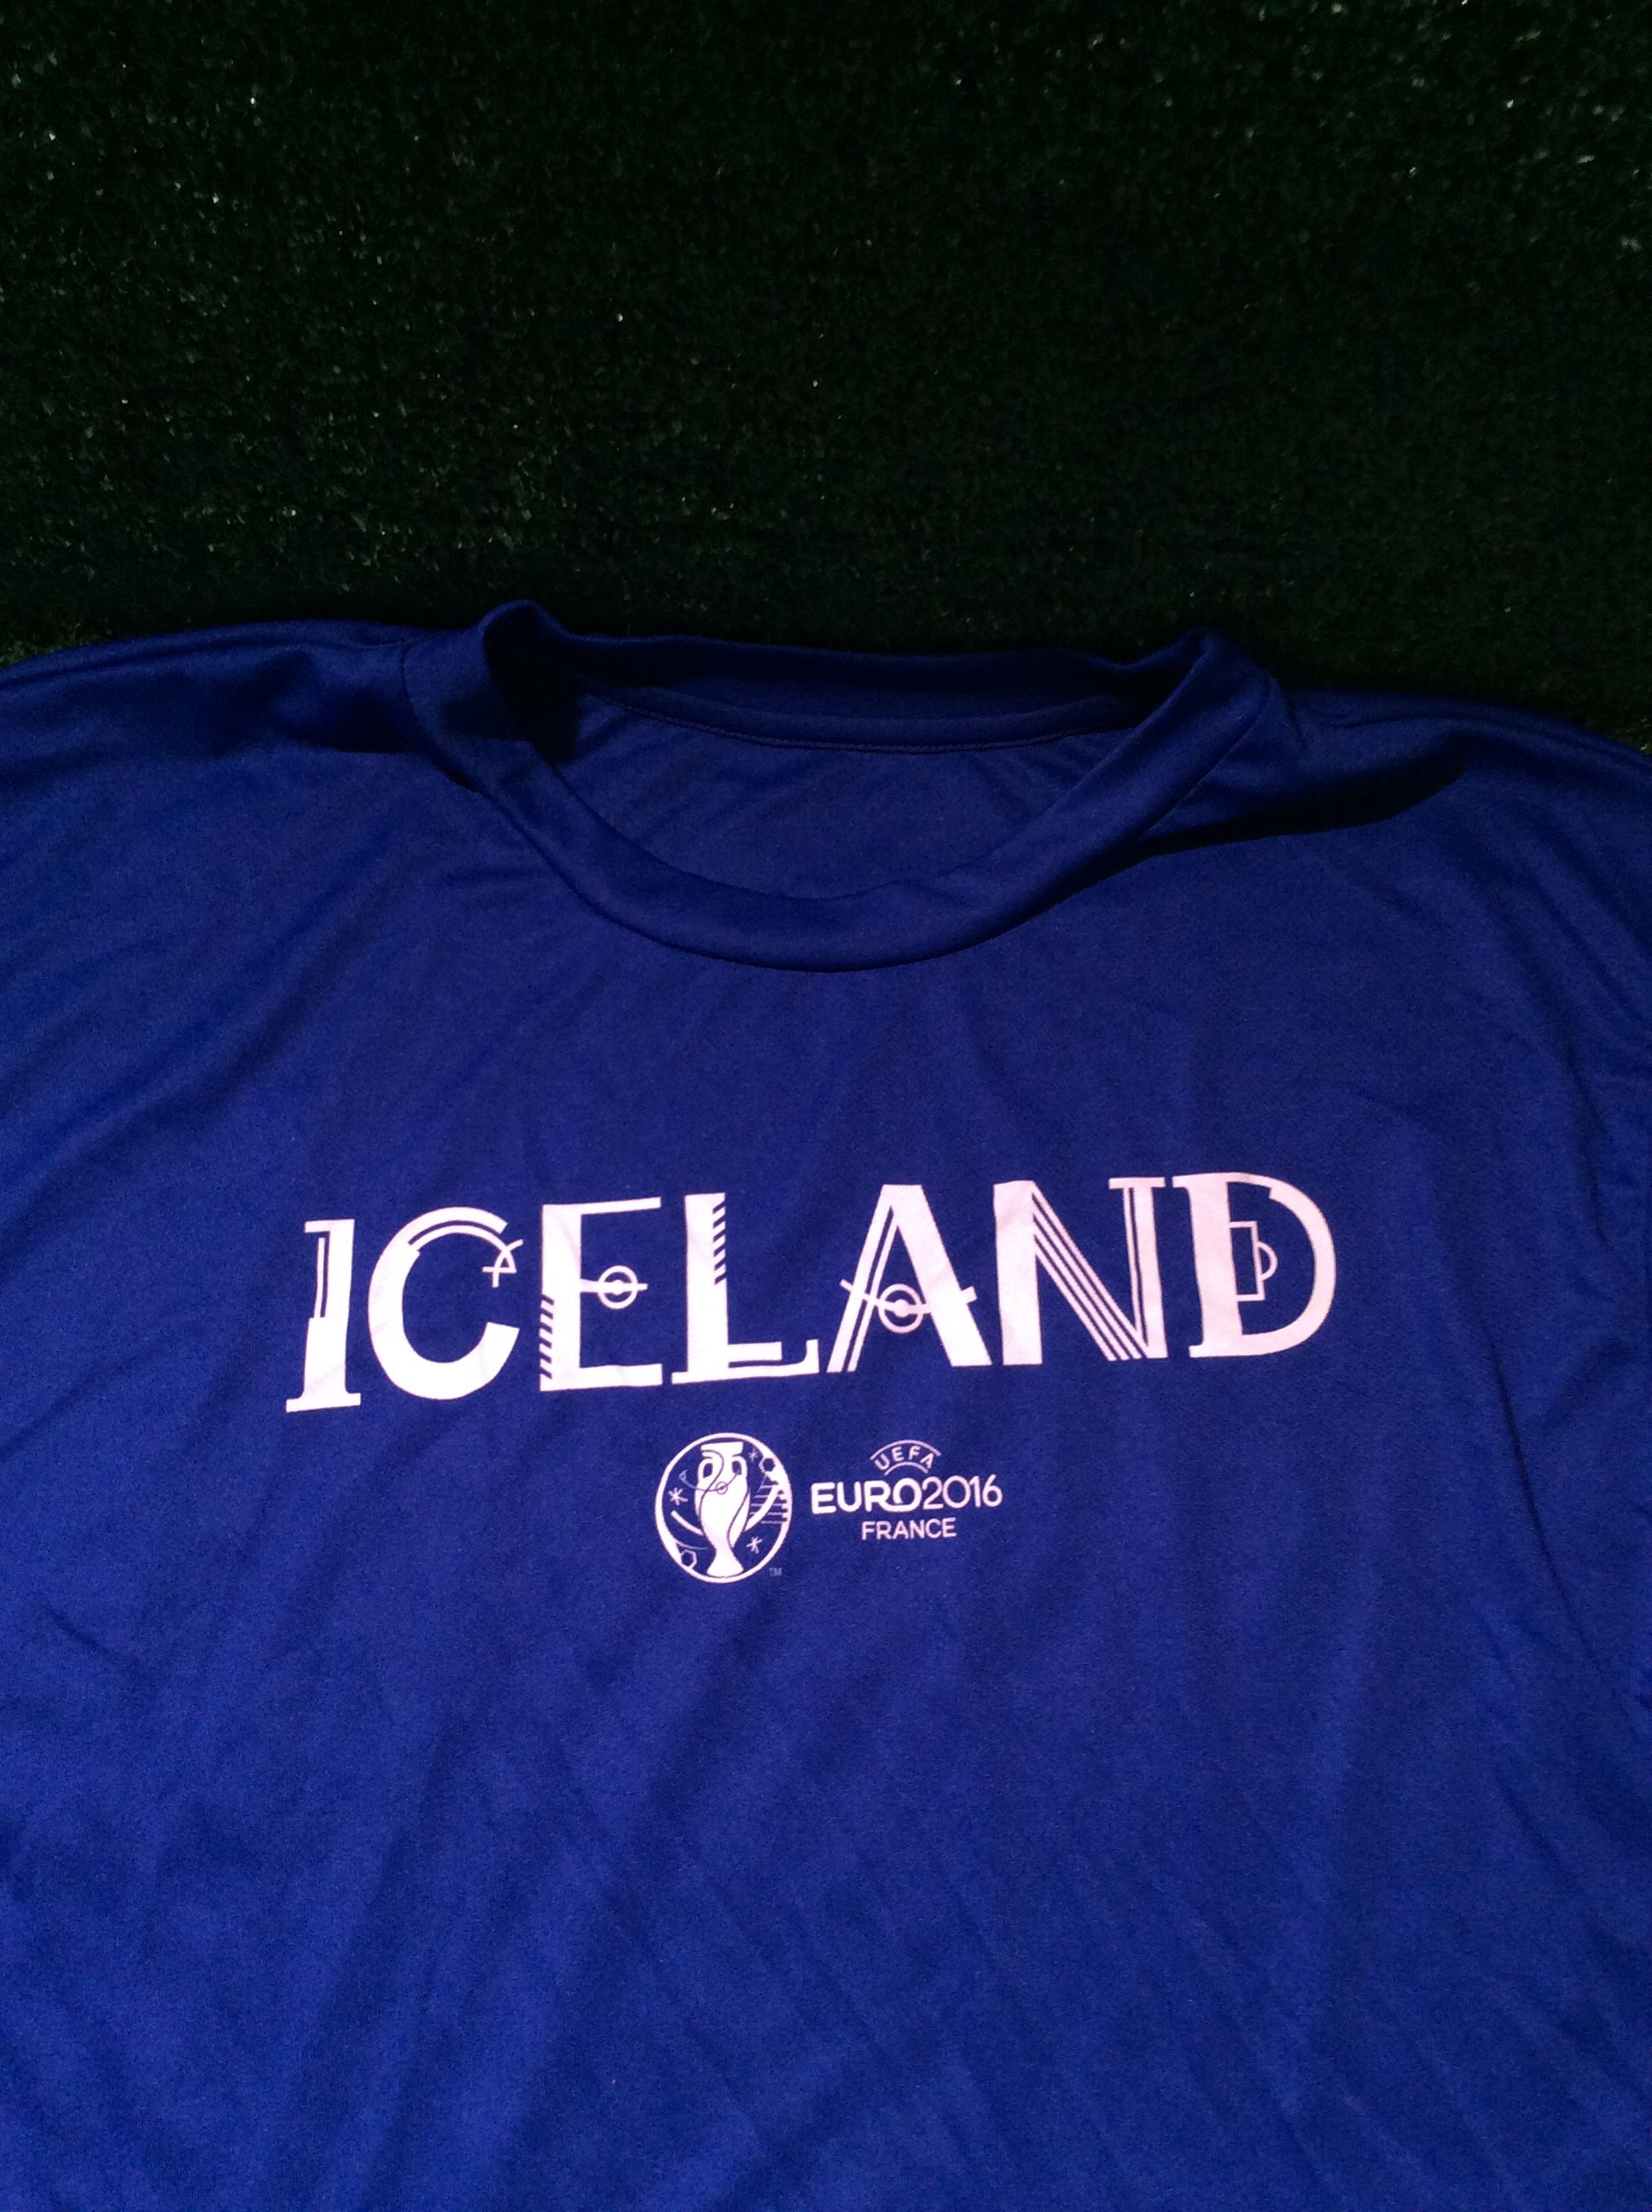 Euro 2016: Iceland's shirt has sold out